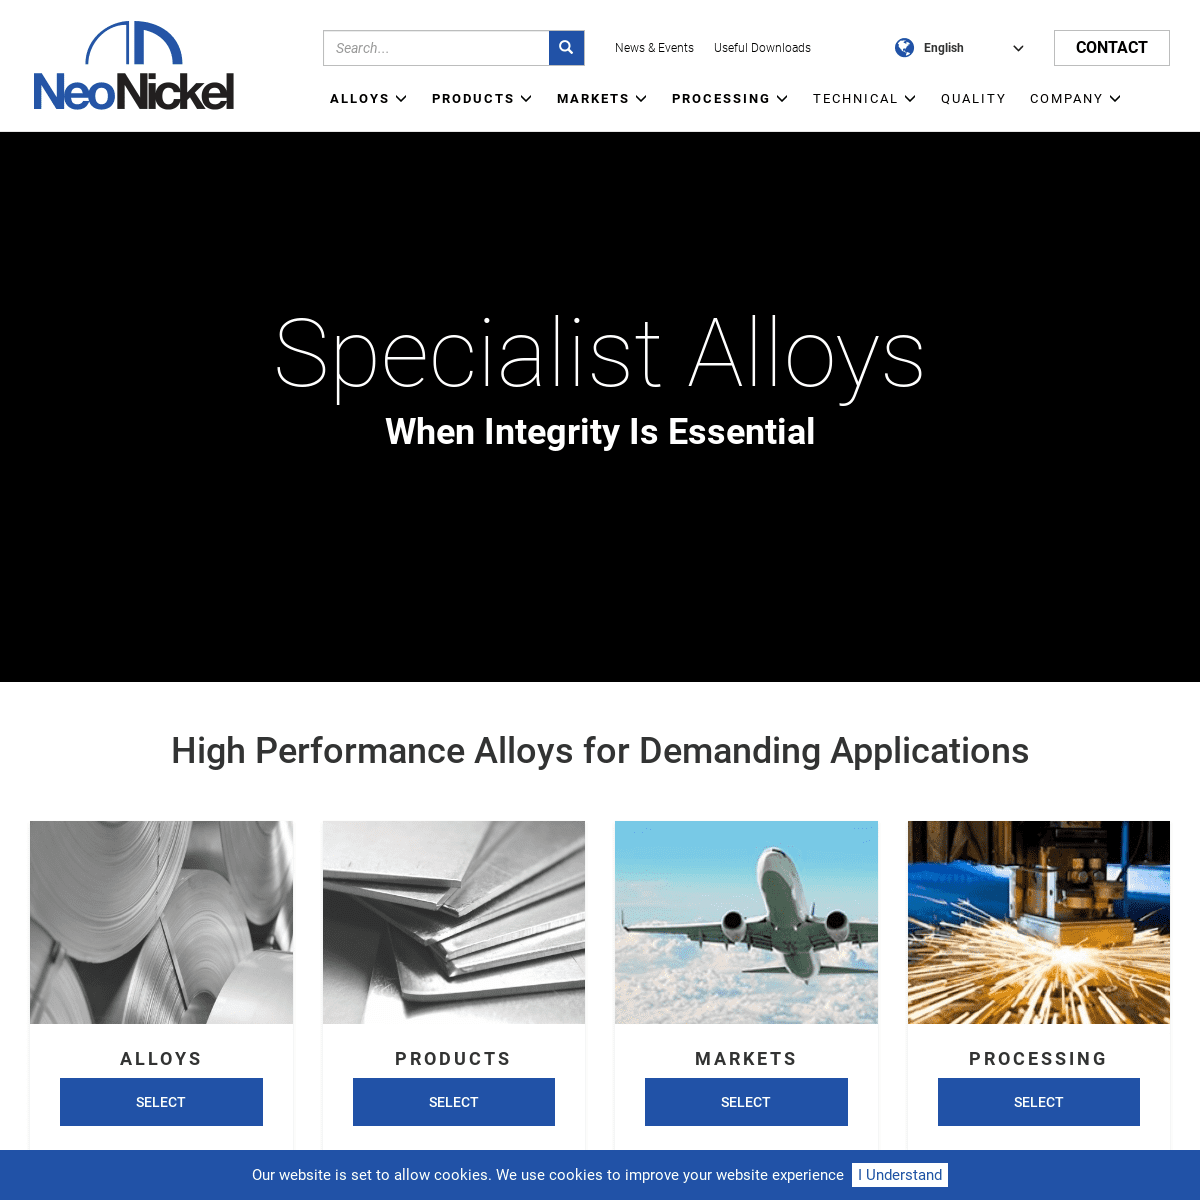 A complete backup of neonickel.com